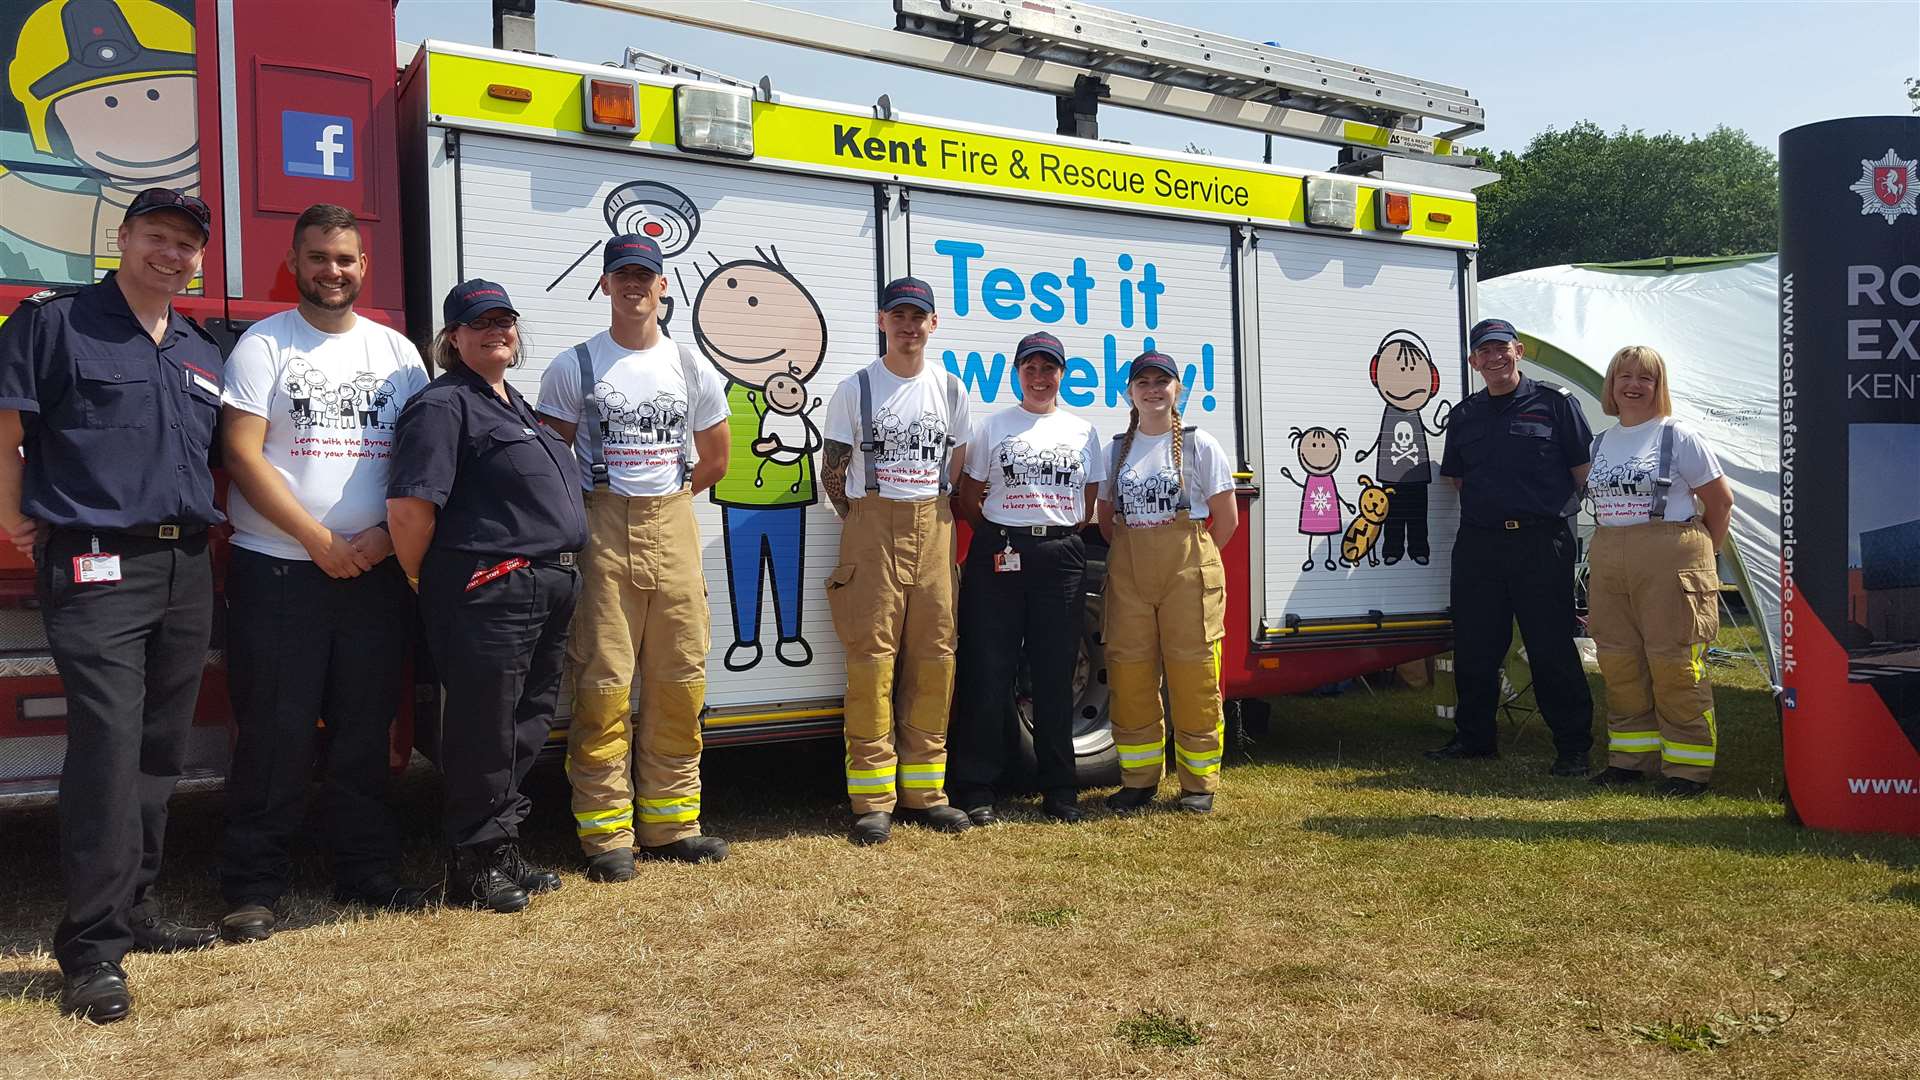 The Kent Fire and Rescue team pose for a photo before their safety awareness campaign launch